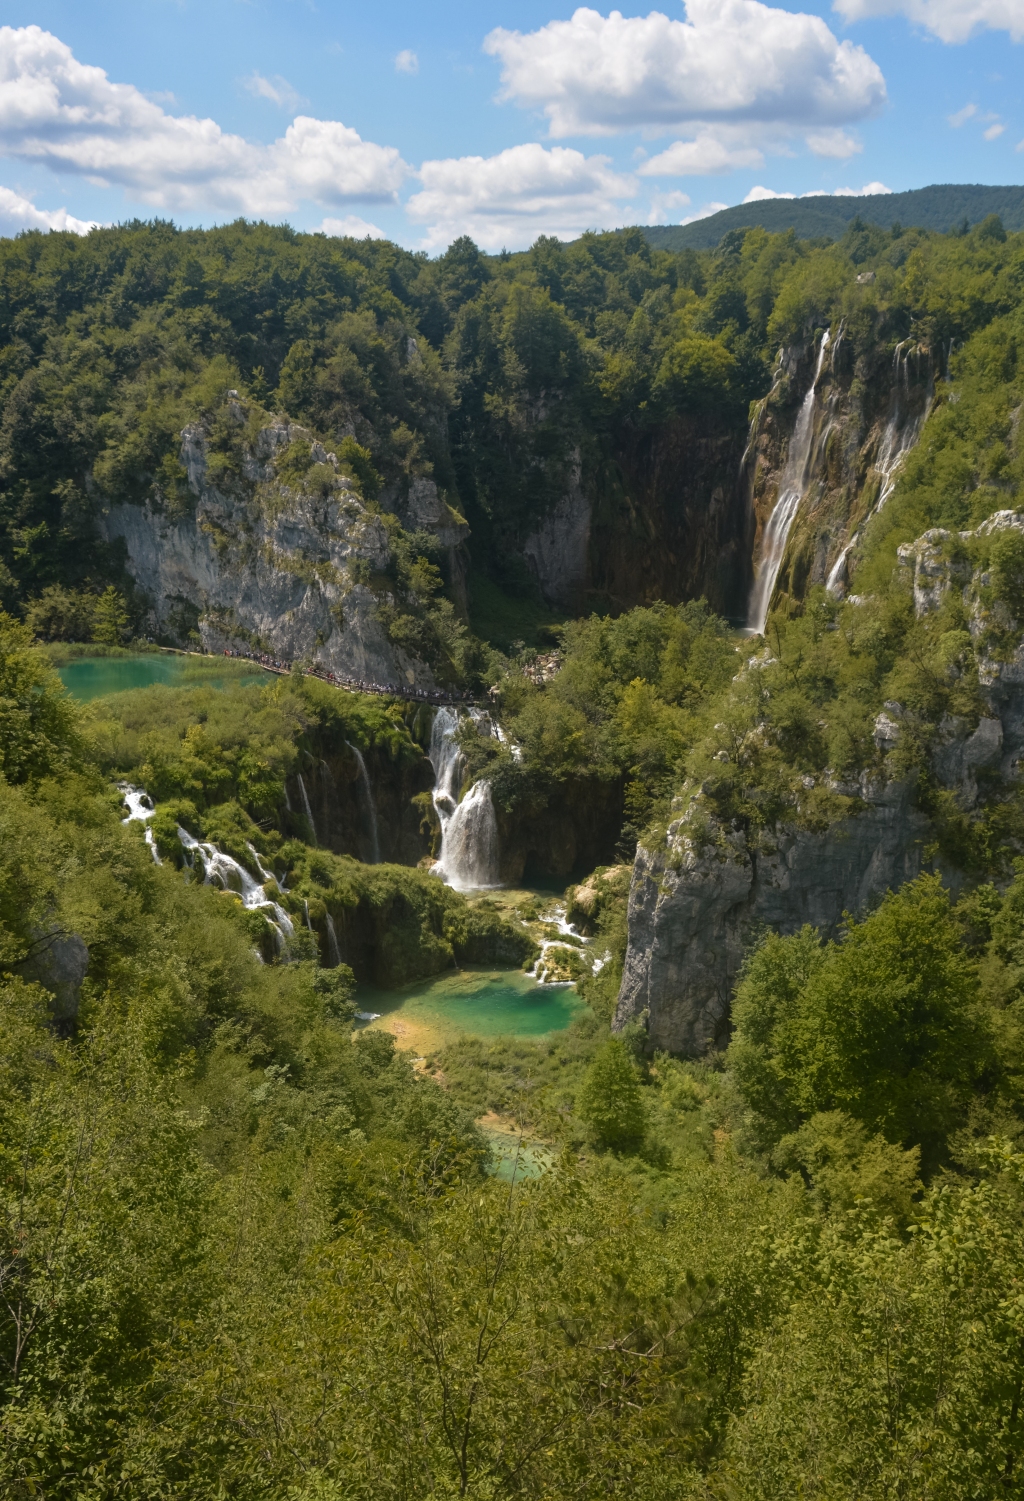 Day Trip to Plitvice Lakes from Zagreb